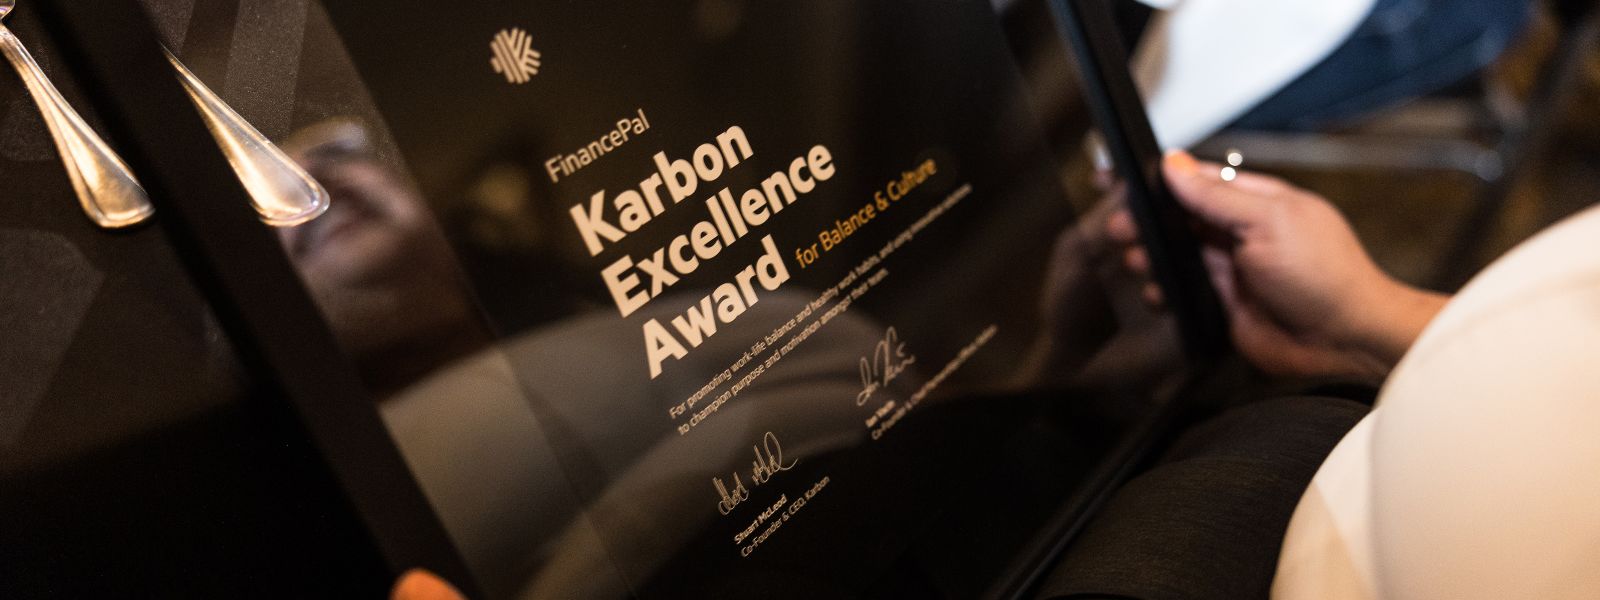 An image of a past award from the 2022 Karbon Excellence Awards